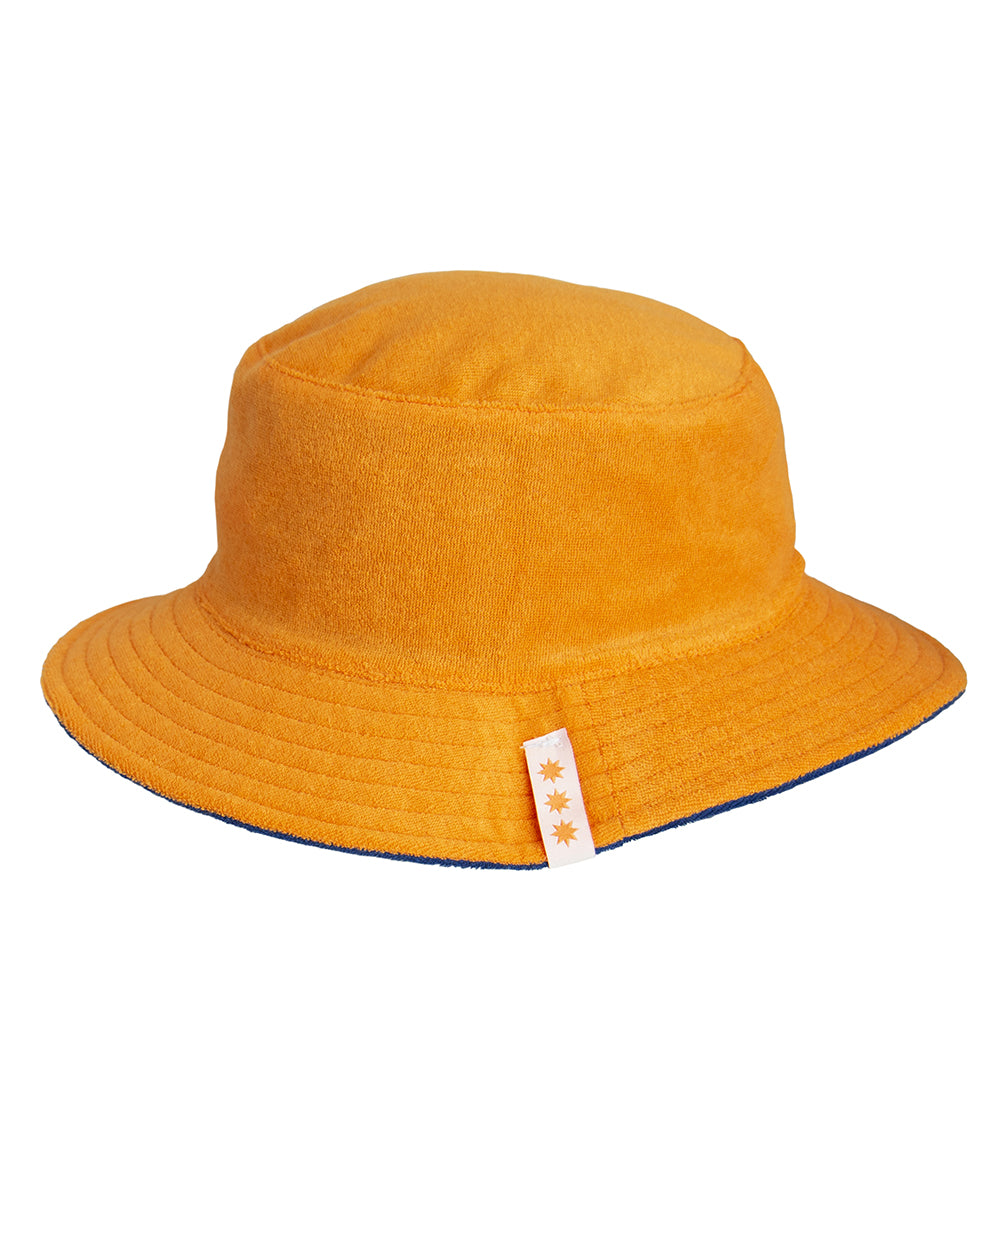 Speight's Towelling Bucket Hat -  Beer Gear Apparel & Merchandise - Speights - Lion Red - VB - Tokyo Dy merch